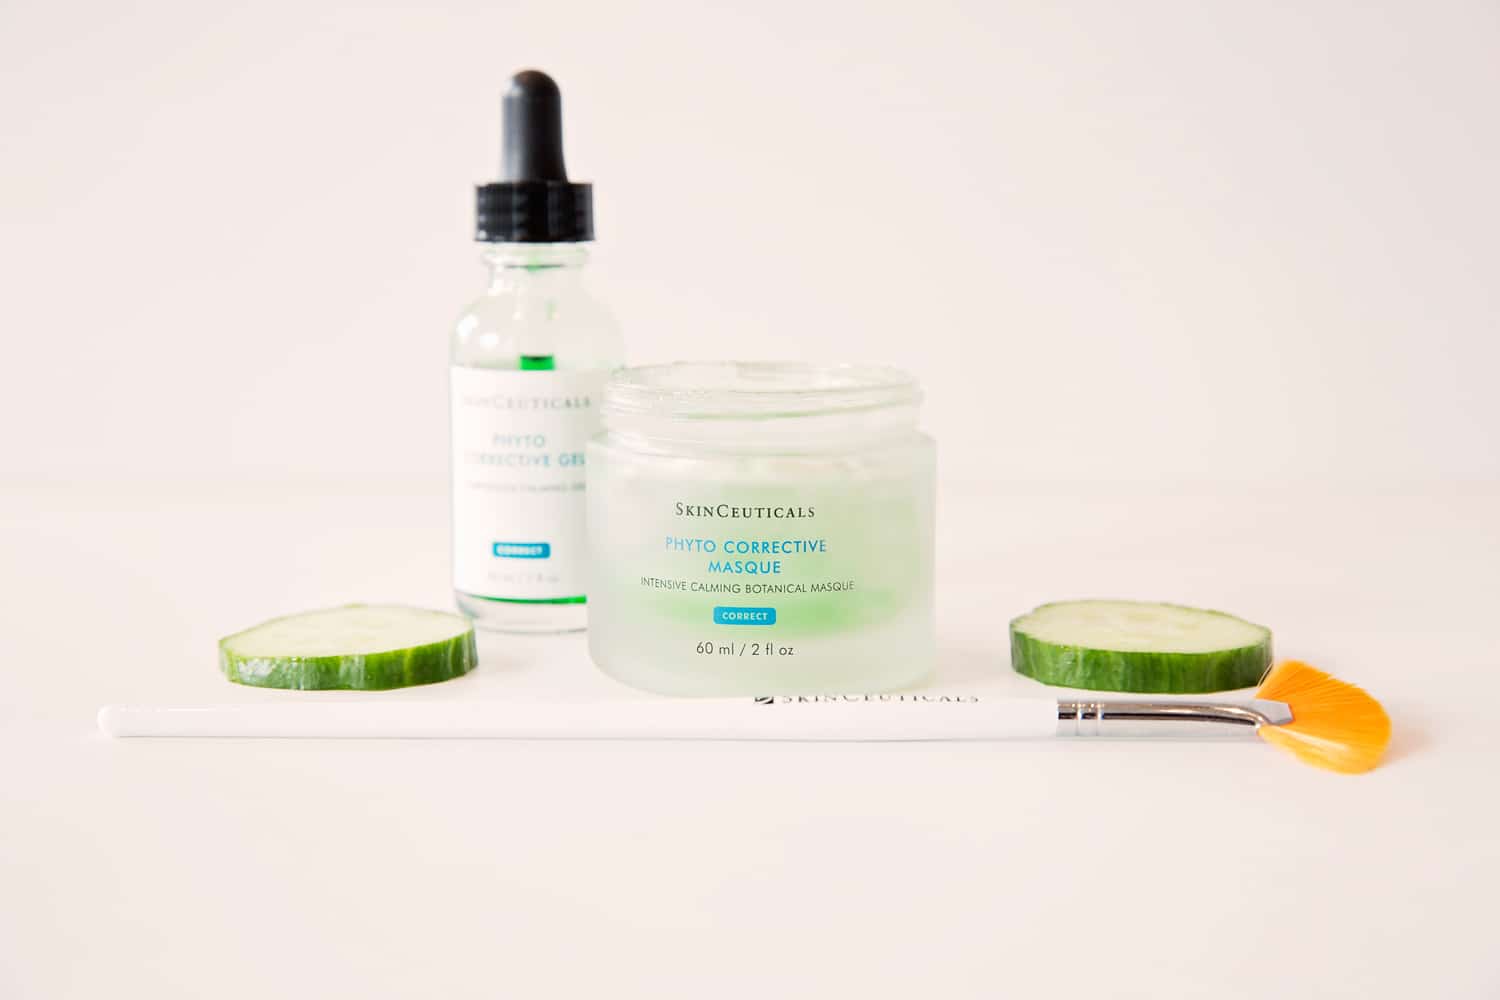 Project Skin Vancouver SkinCeuticals Phyto Corrective Masque